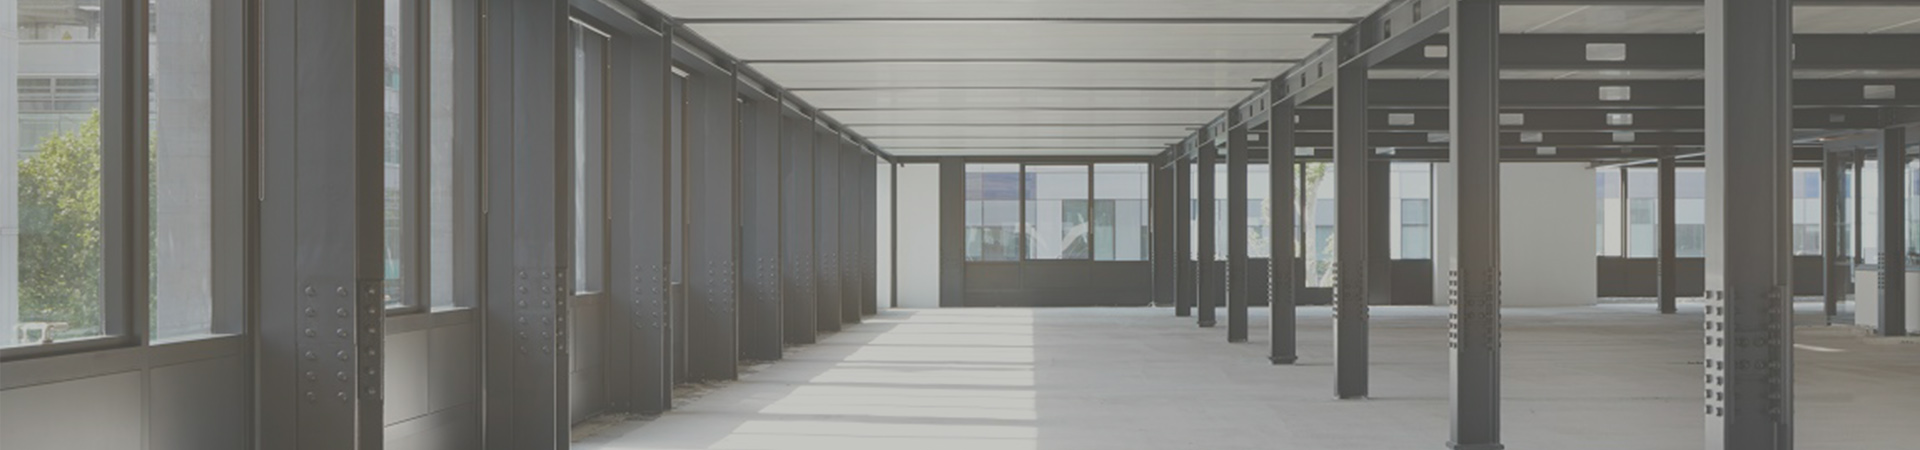 Internal image of steel building offices